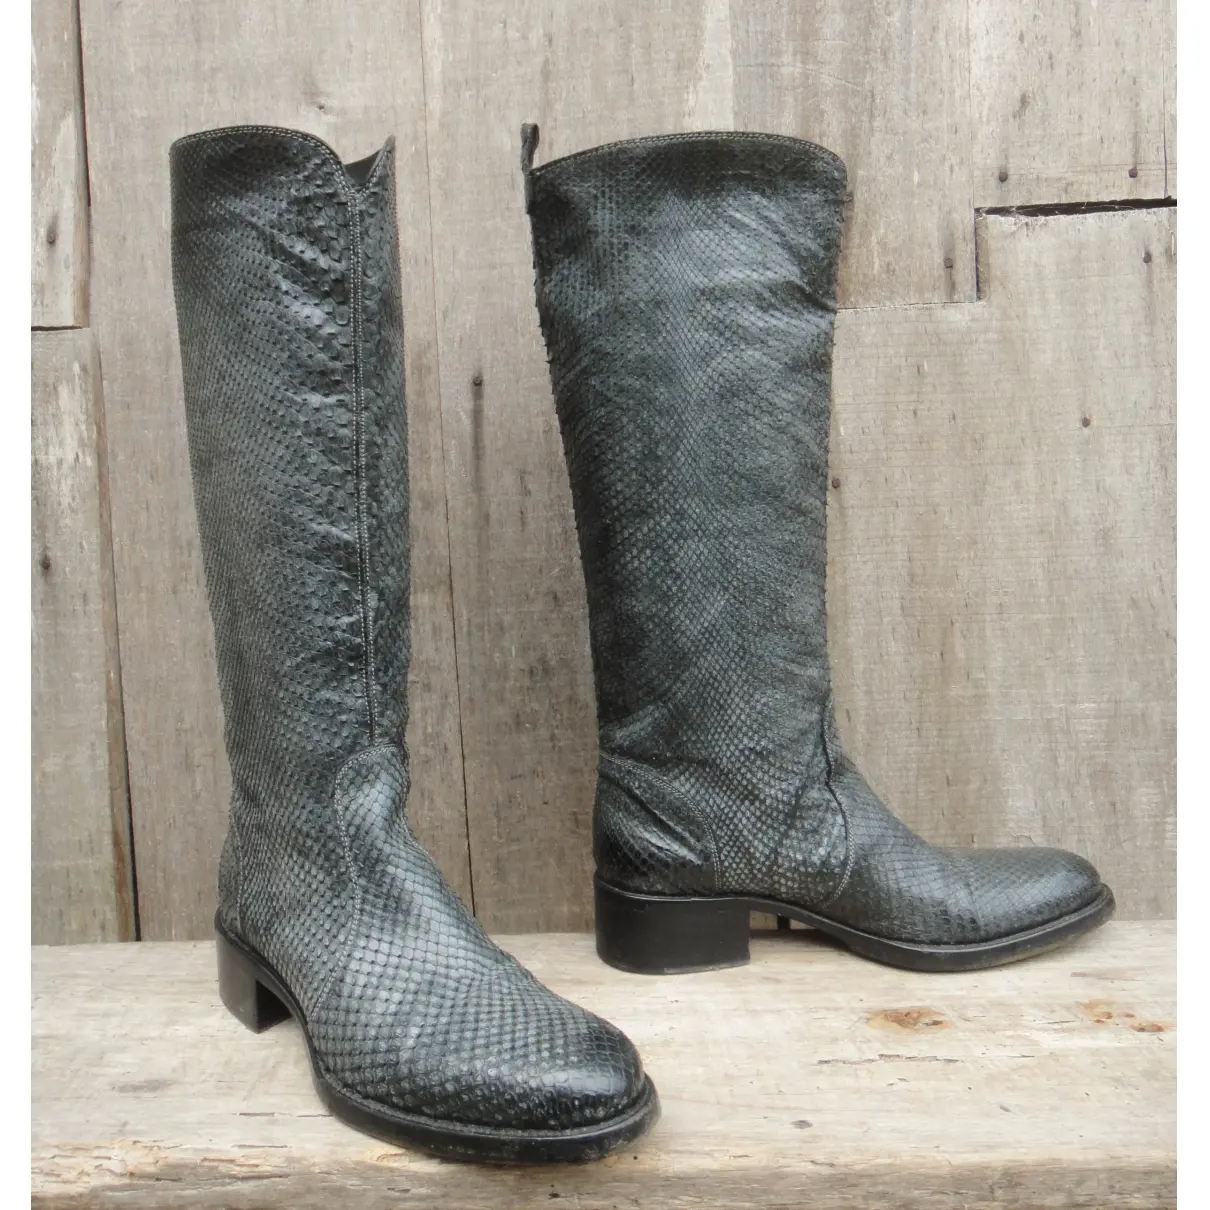 Buy Sartore Python riding boots online